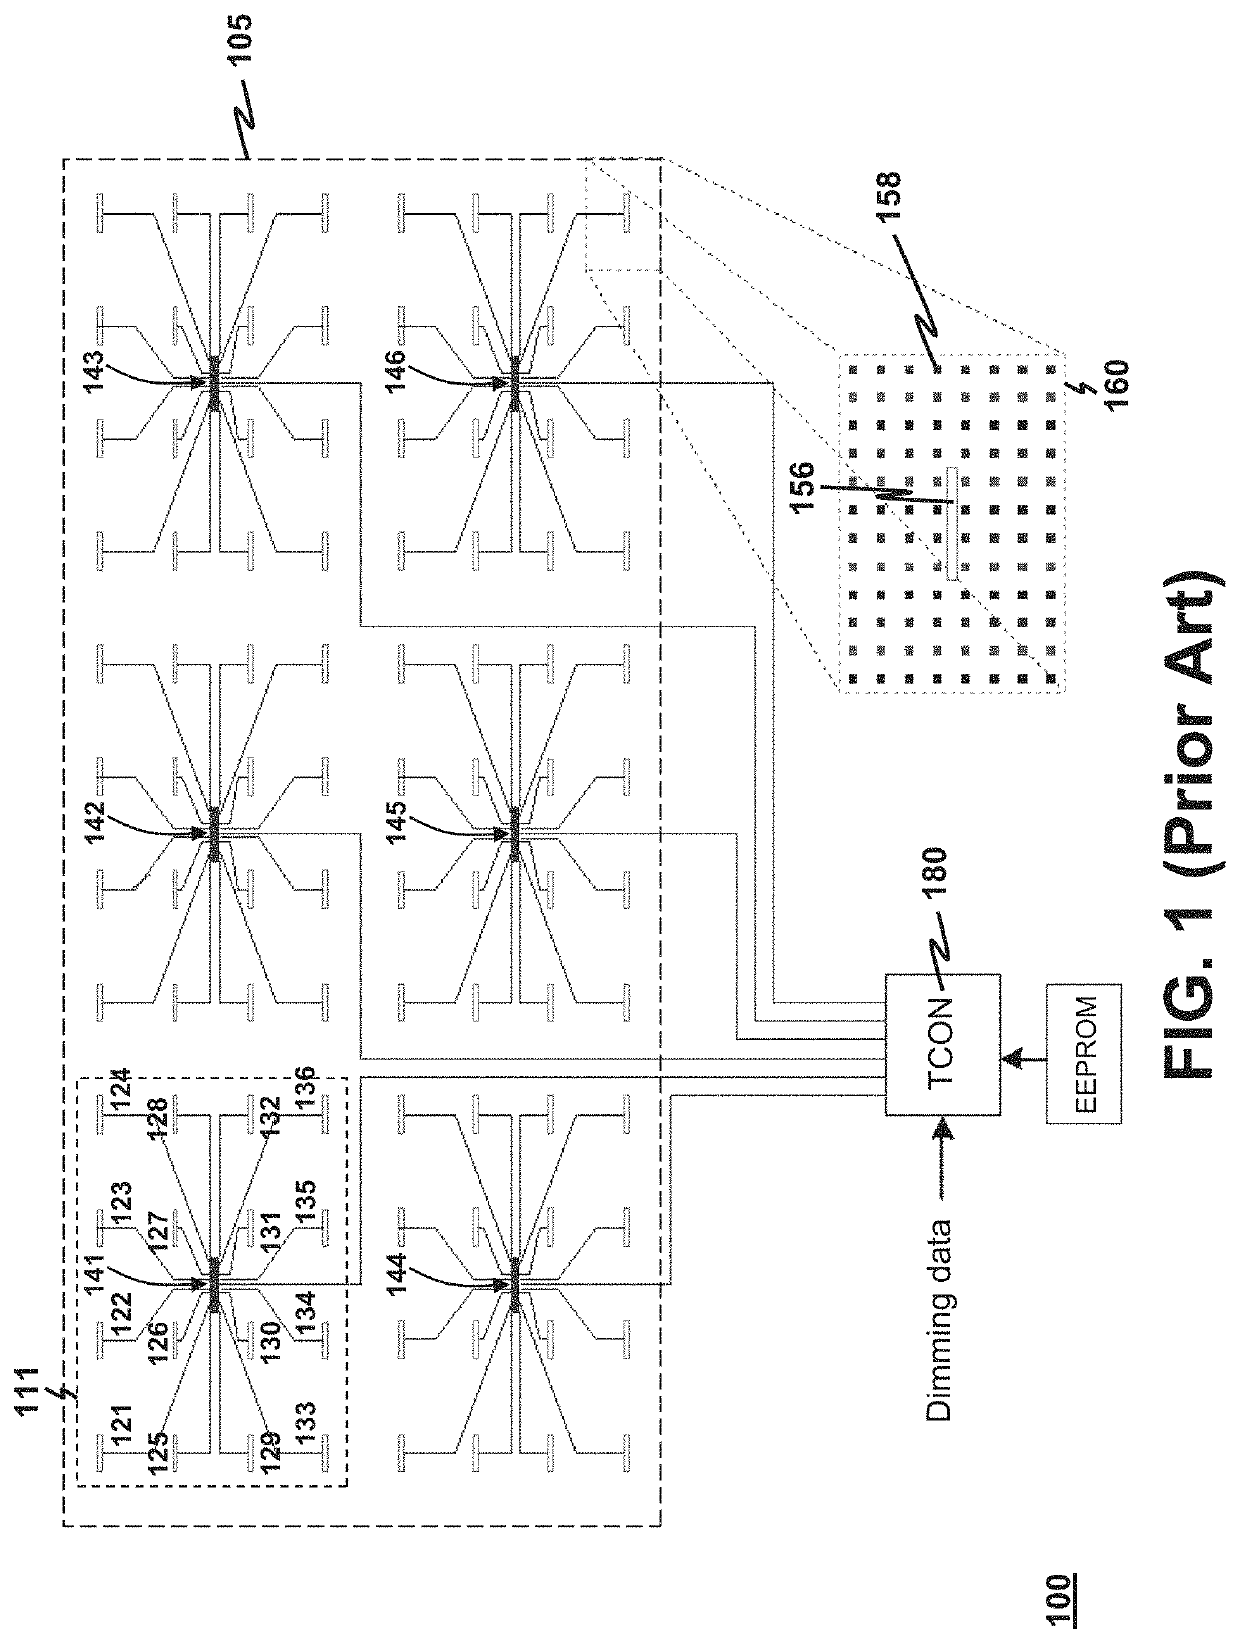 Display panel with distributed driver network